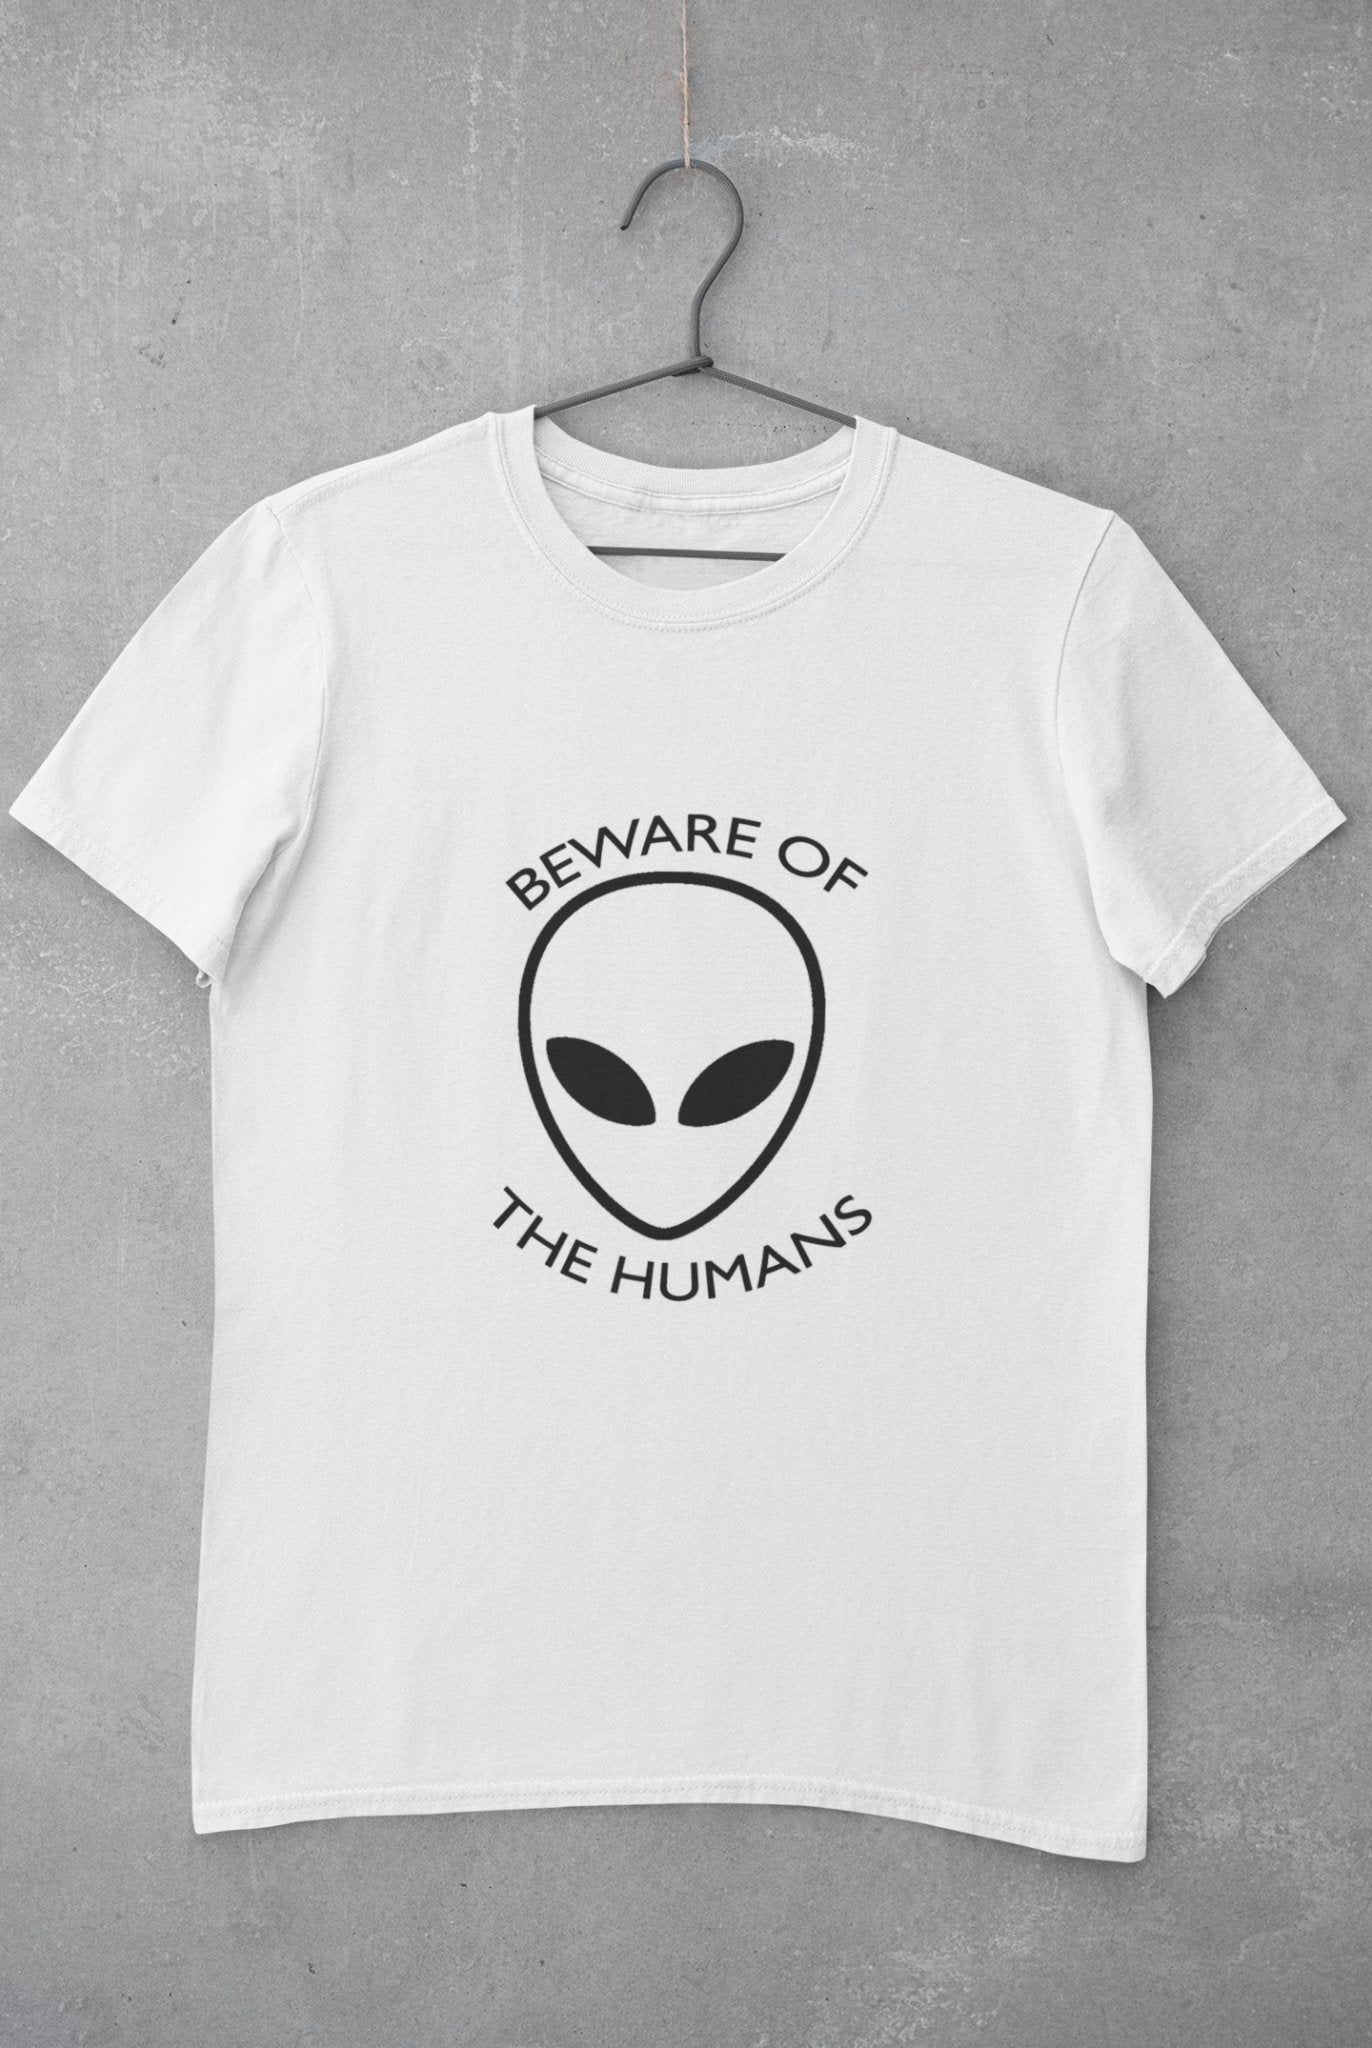 Beware of The Humans Women Half Sleeves T-shirt- FunkyTradition - Funky Tees Club